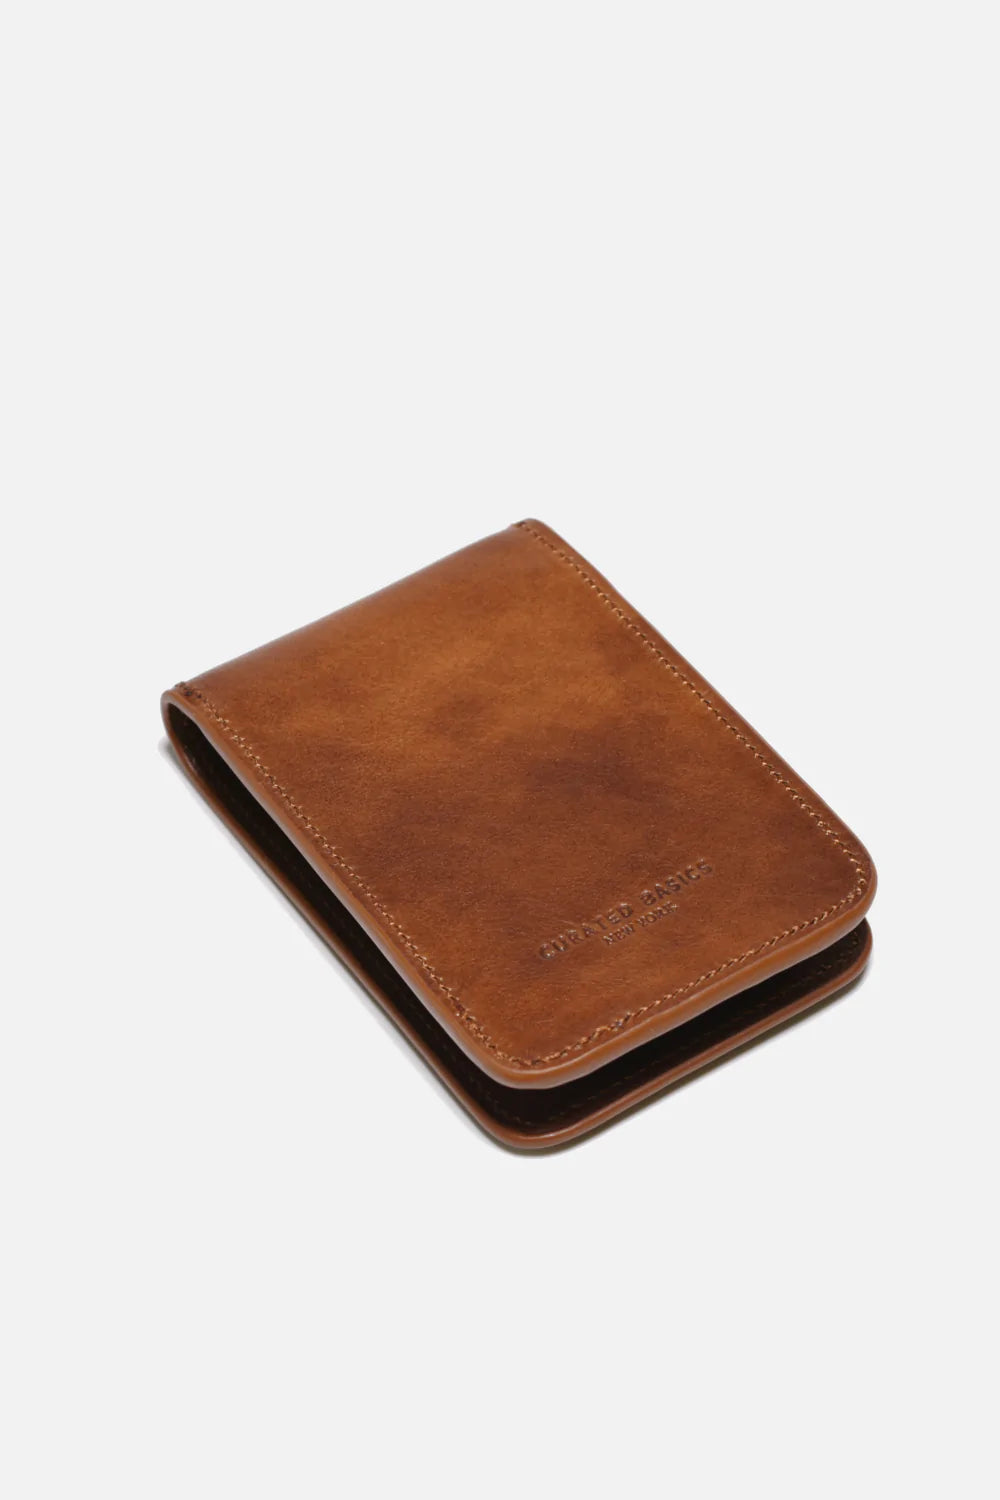 Curated Basics Leather Cig Case